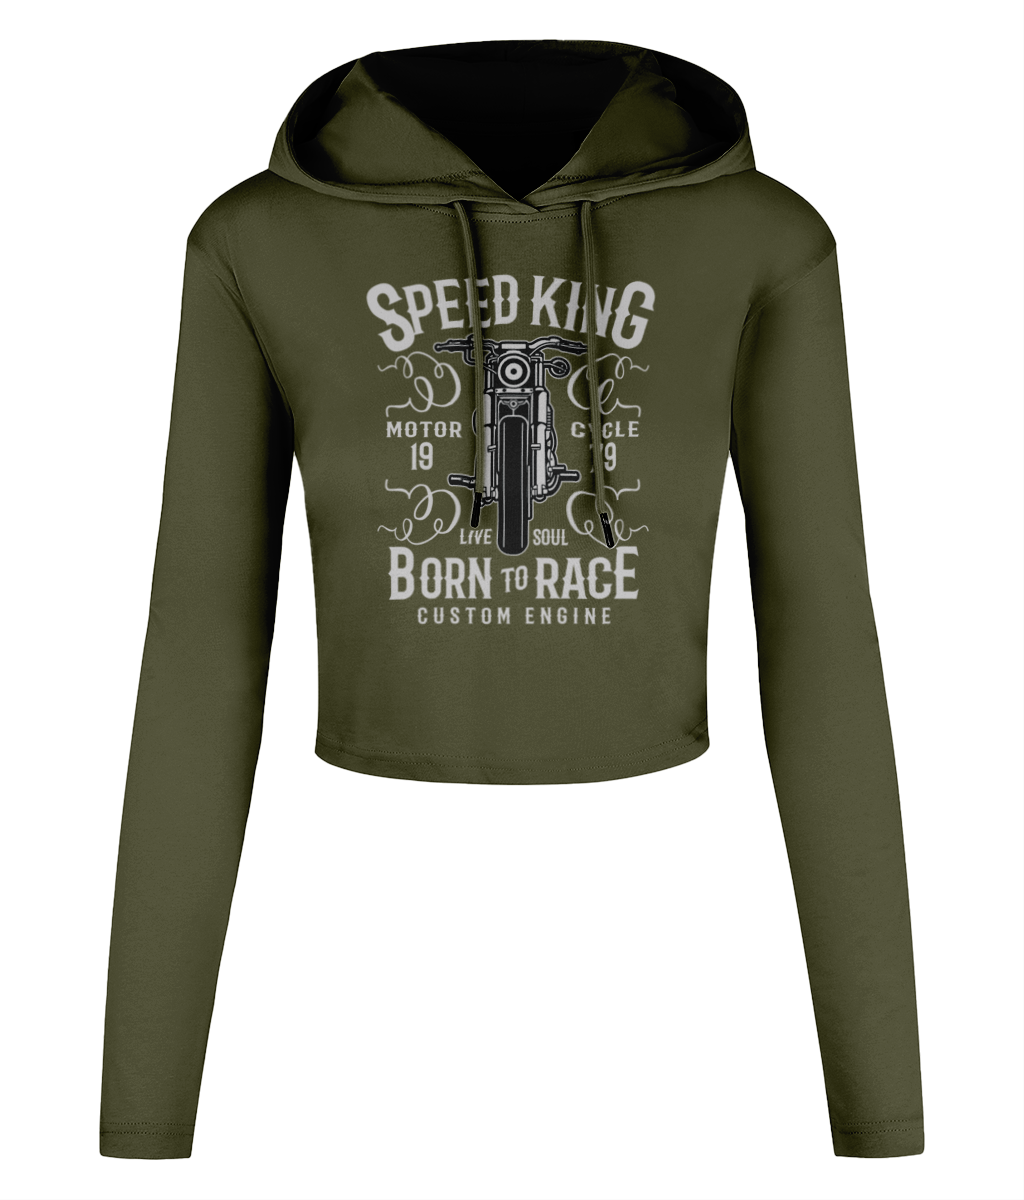 Speed King – Women’s Cropped Hooded T-shirt